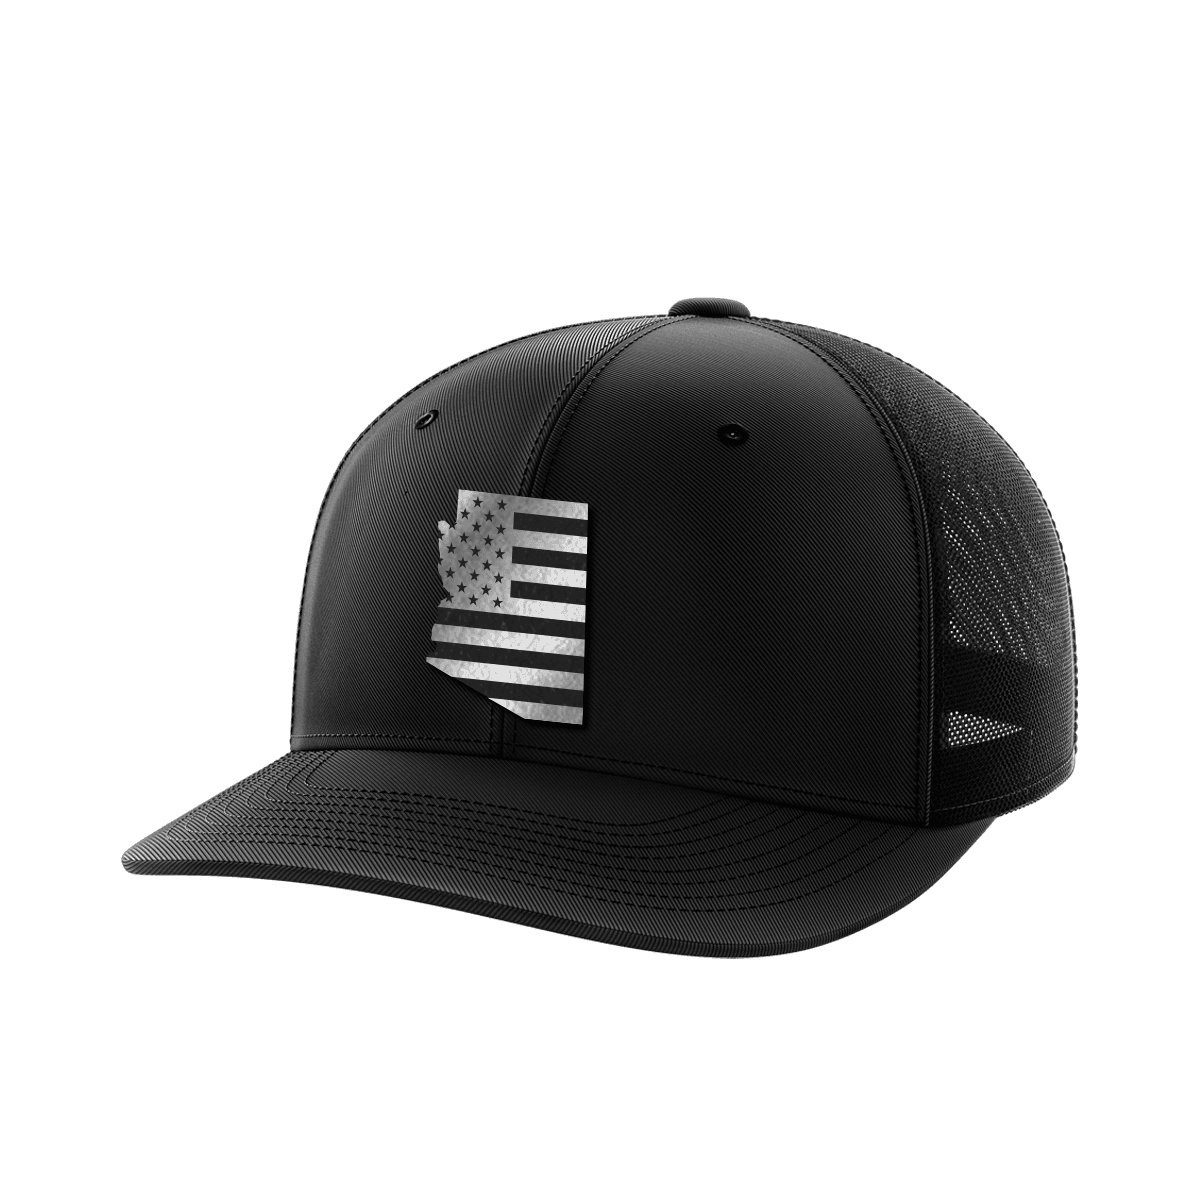 Arizona United Collection (black leather) - Greater Half